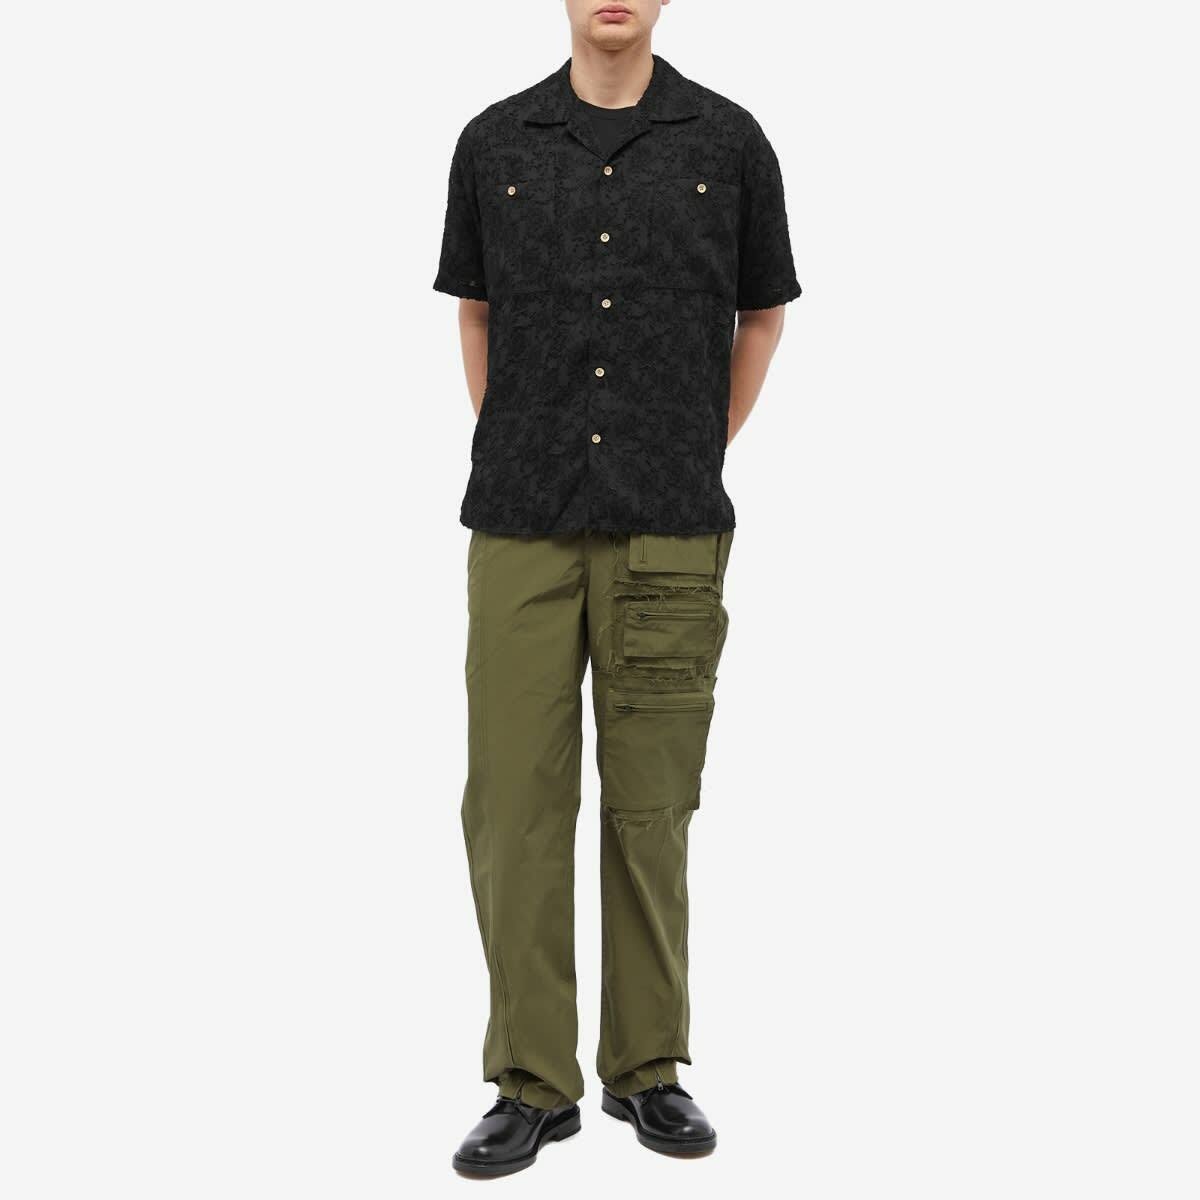 Andersson Bell Men's Bali Vacation Shirt in Black